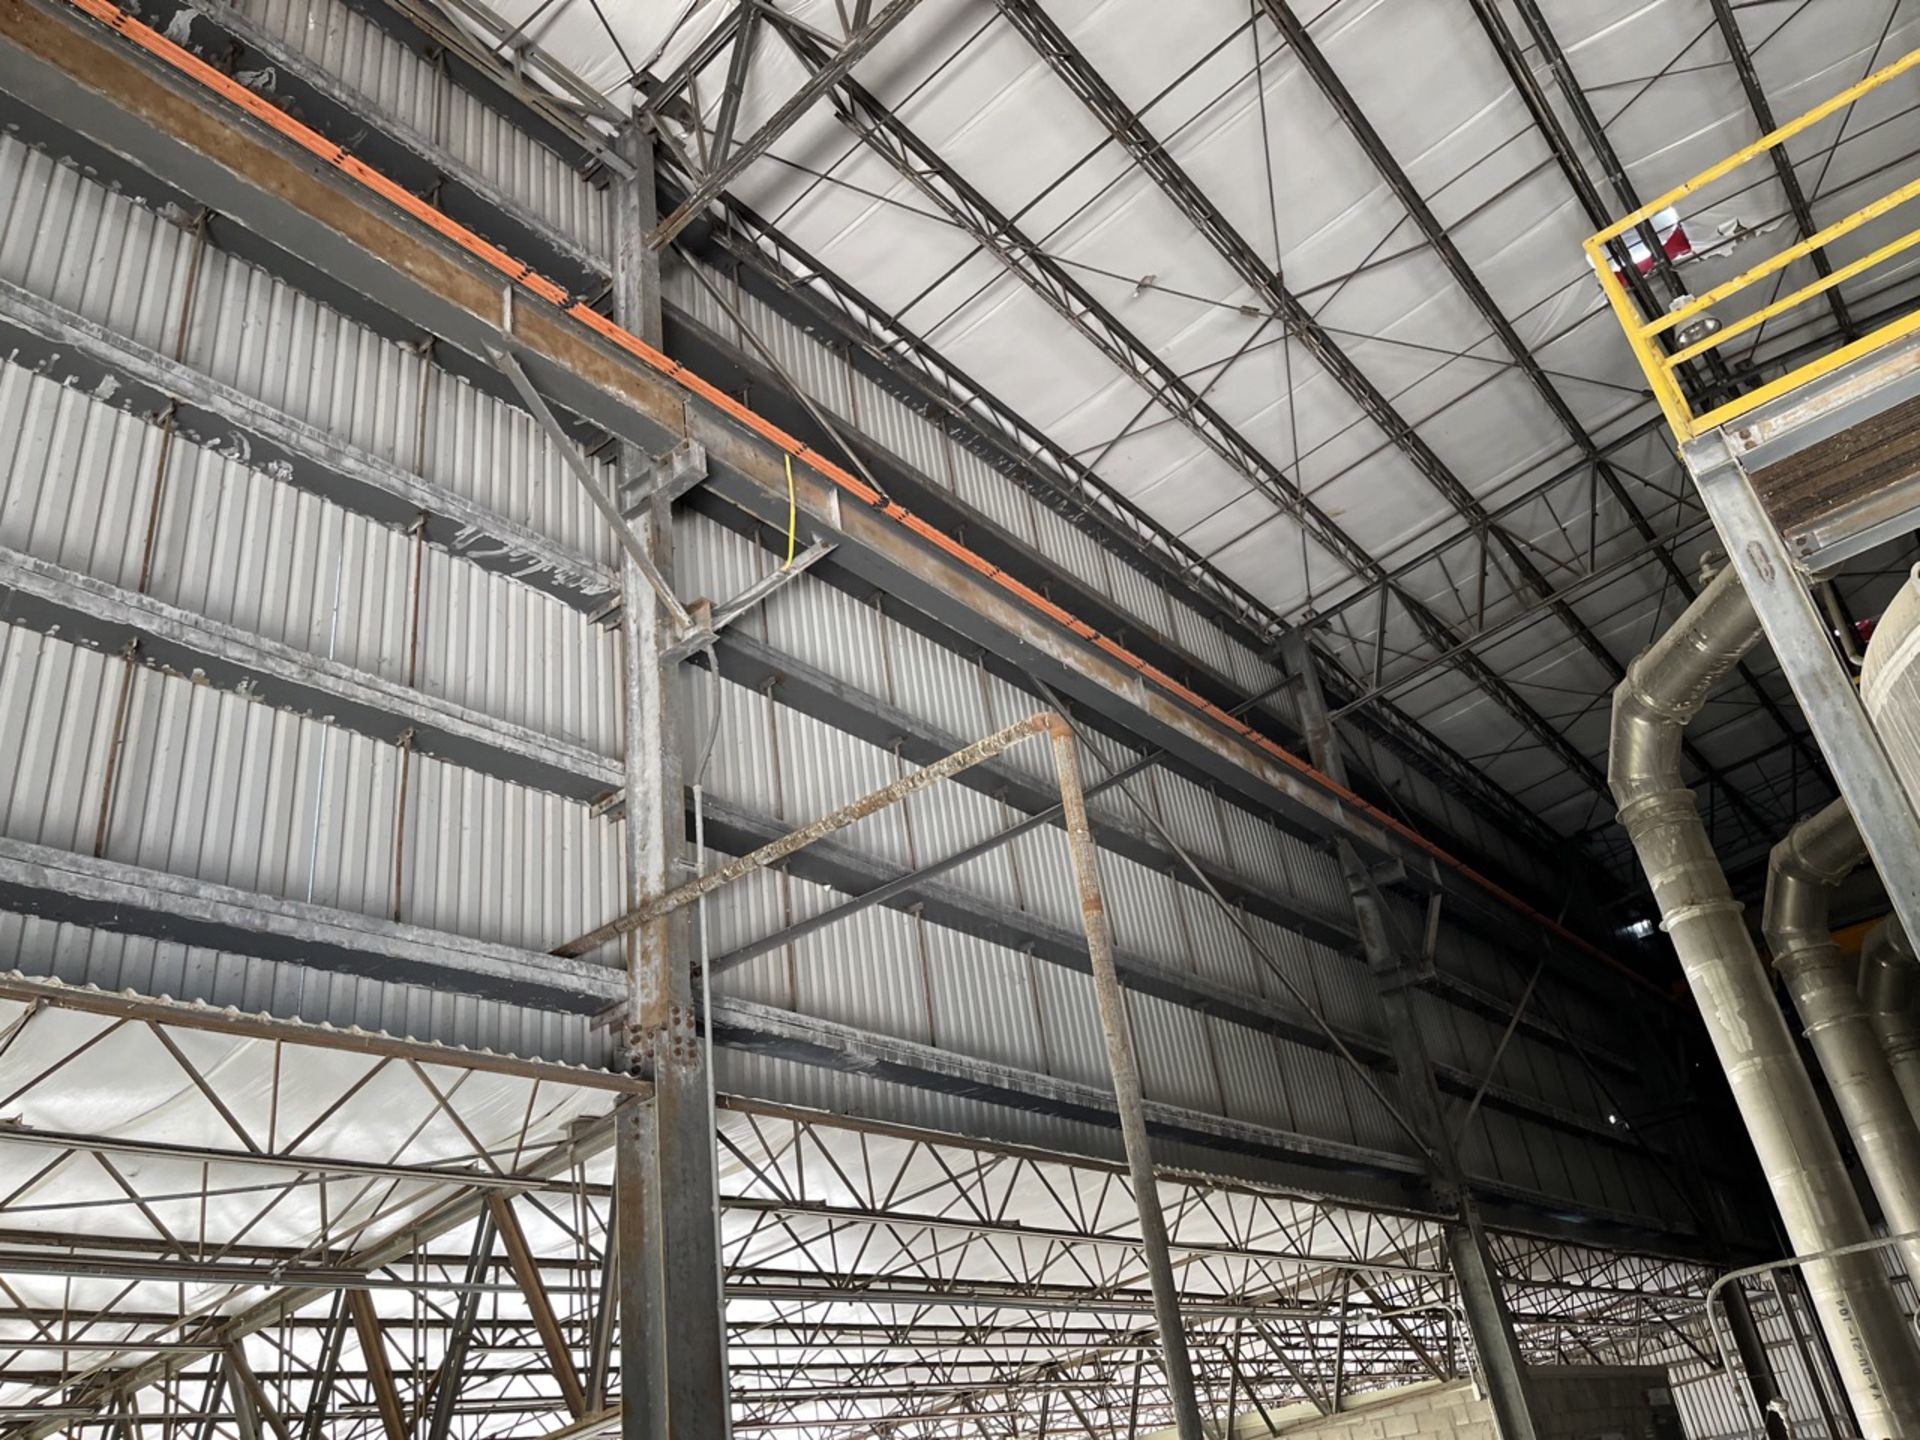 Complete Industrial Warehouse Structure - Image 119 of 141